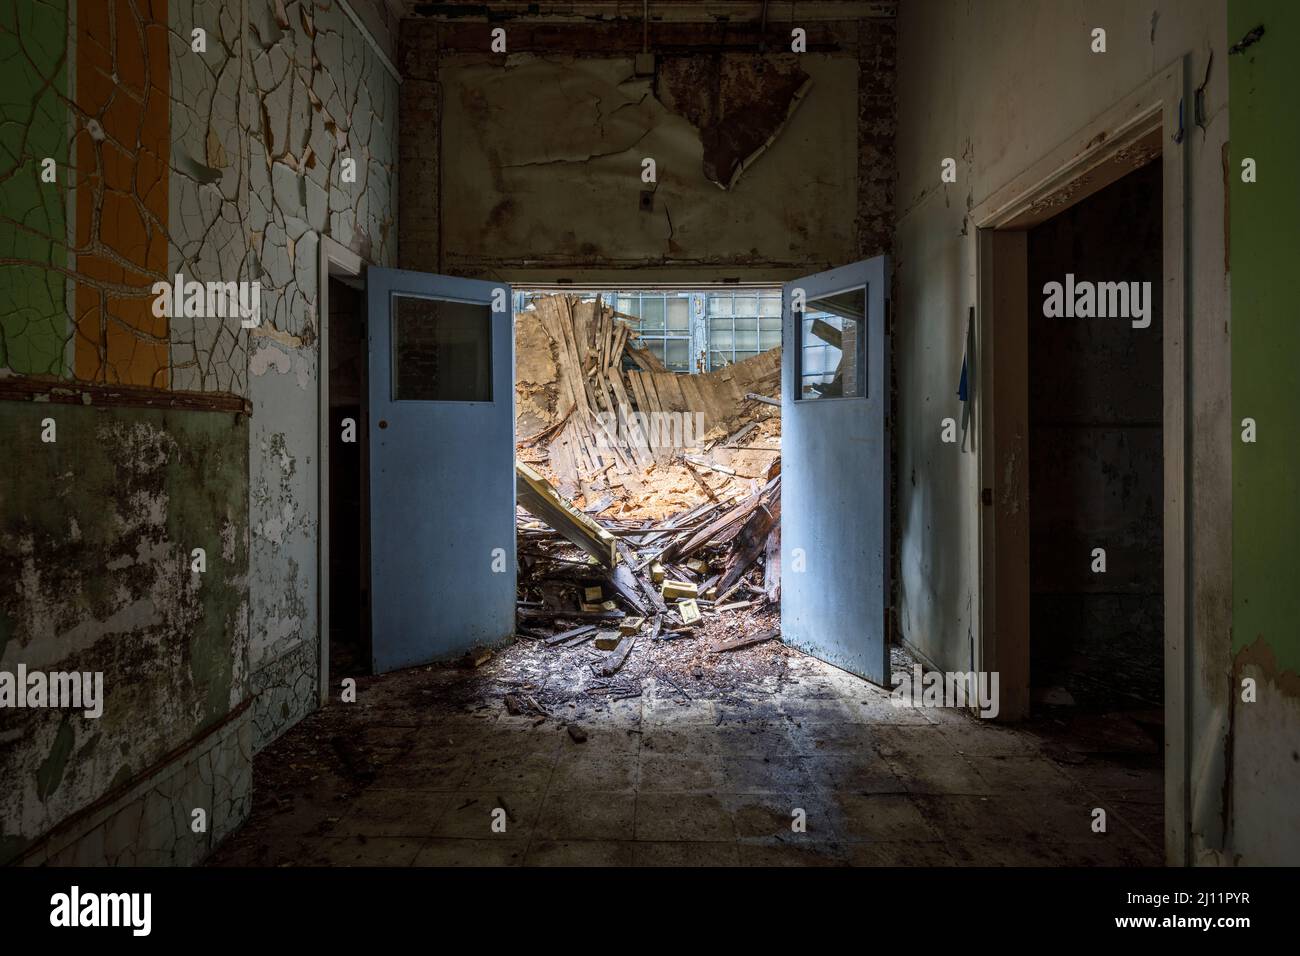 Looking through a doorway at a partially collapsed building. Stock Photo